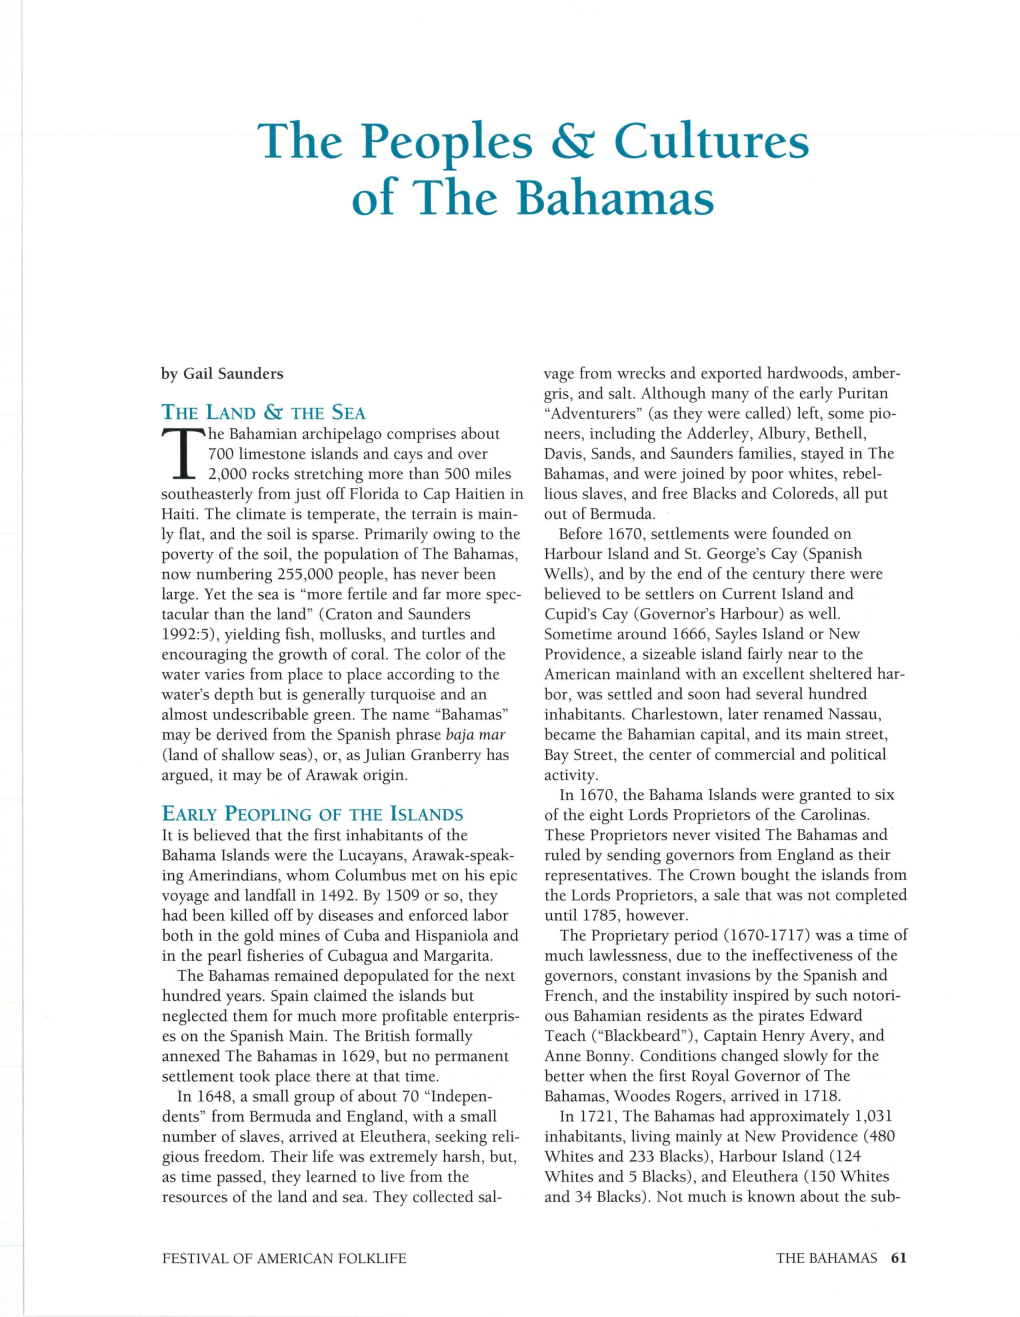 The Peoples & Cultures of the Bahamas